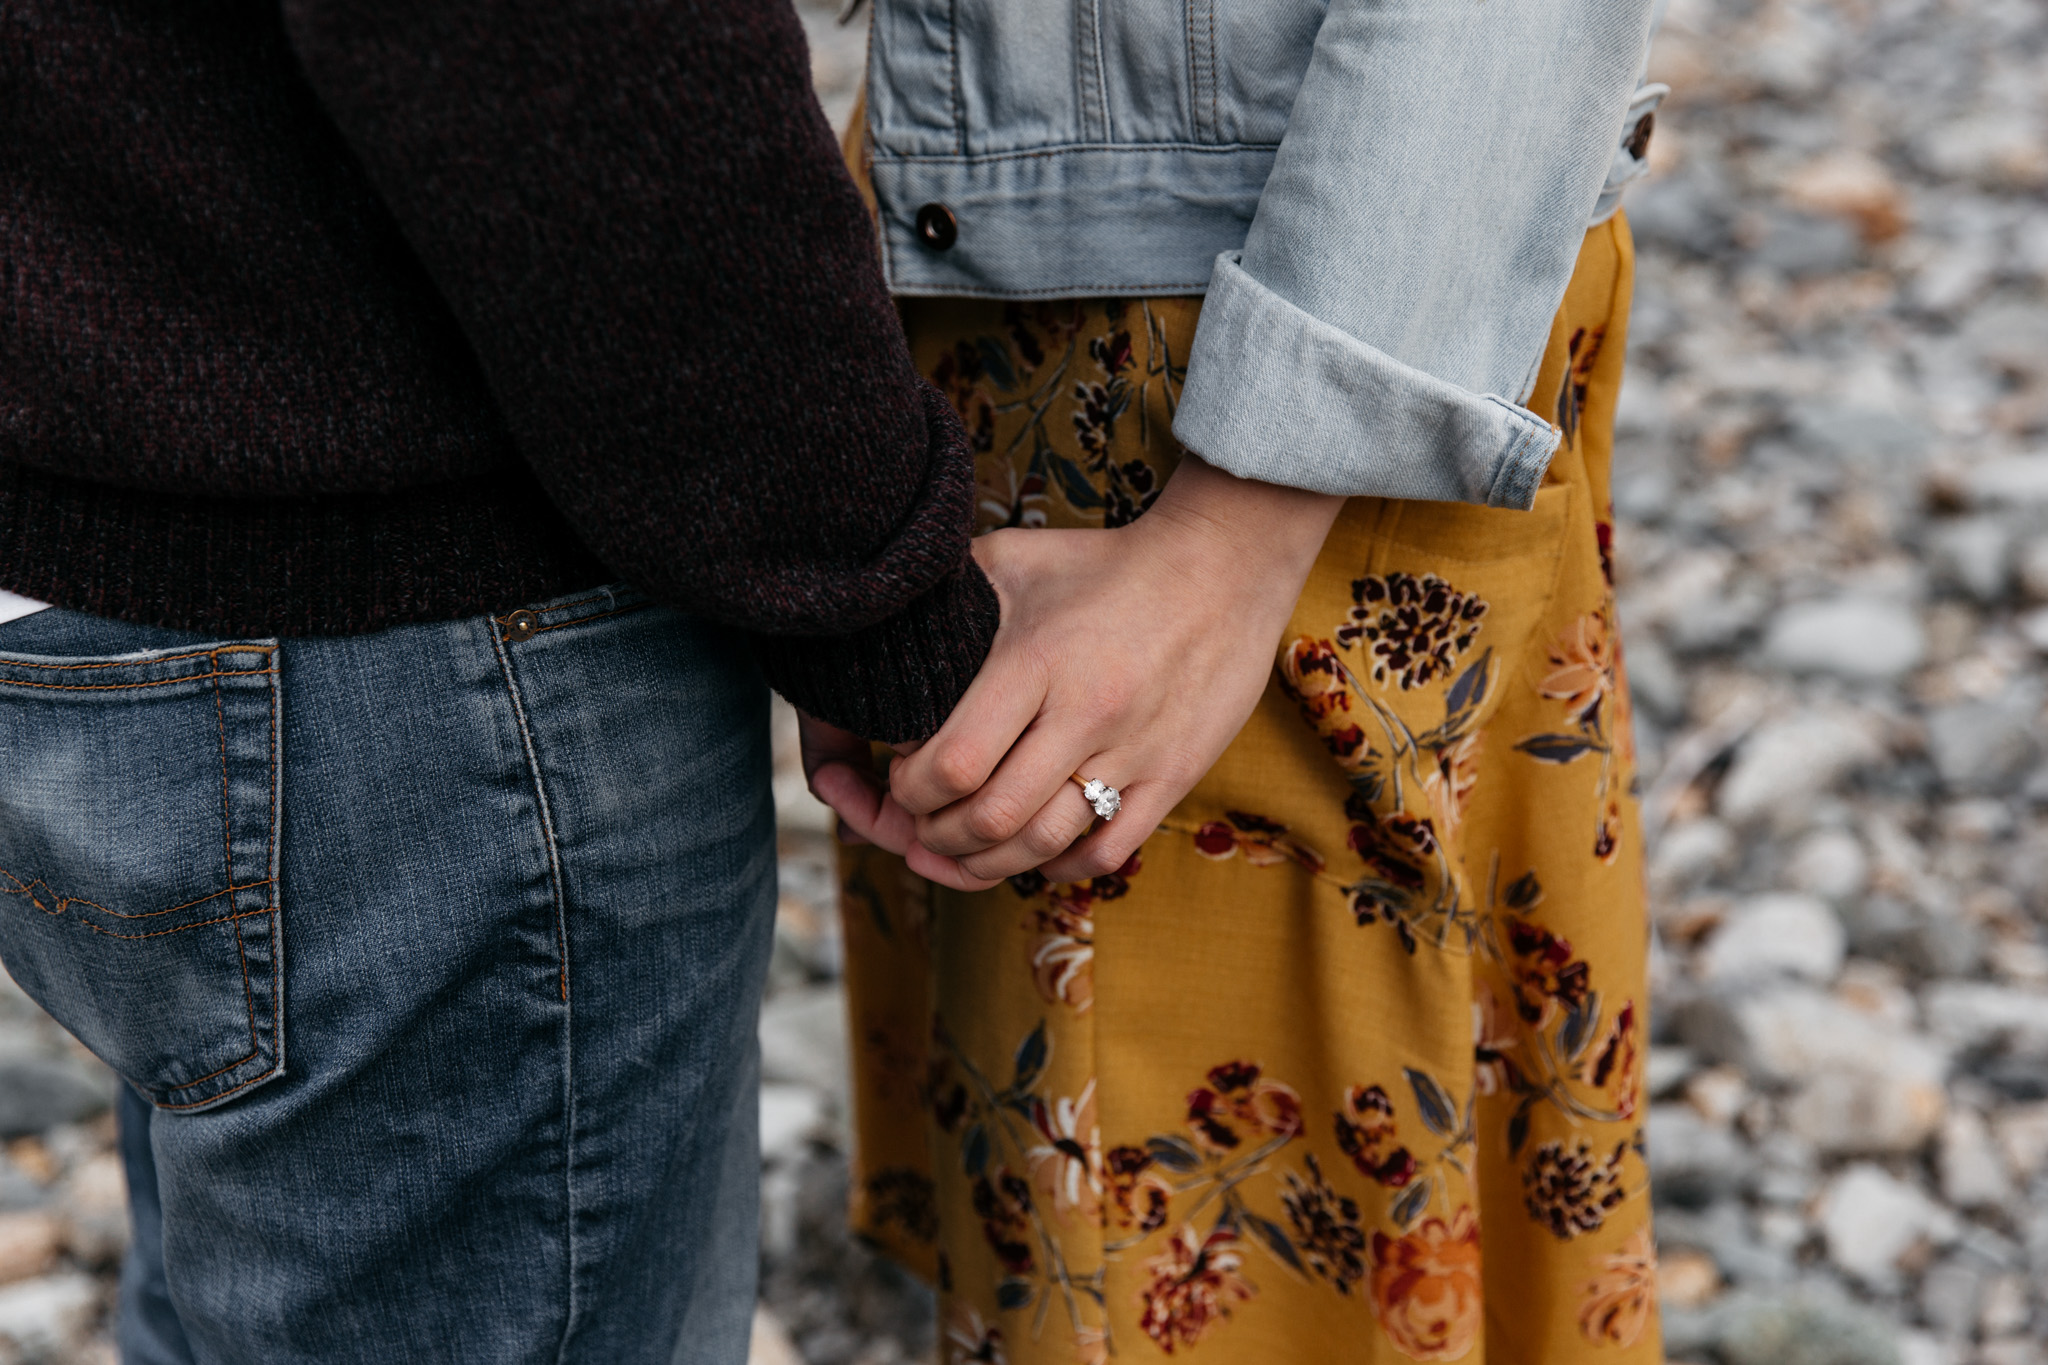 Fall Engagement Session at Gold Creek Pond Snoqualmie Pass Brittney Hyatt Photography